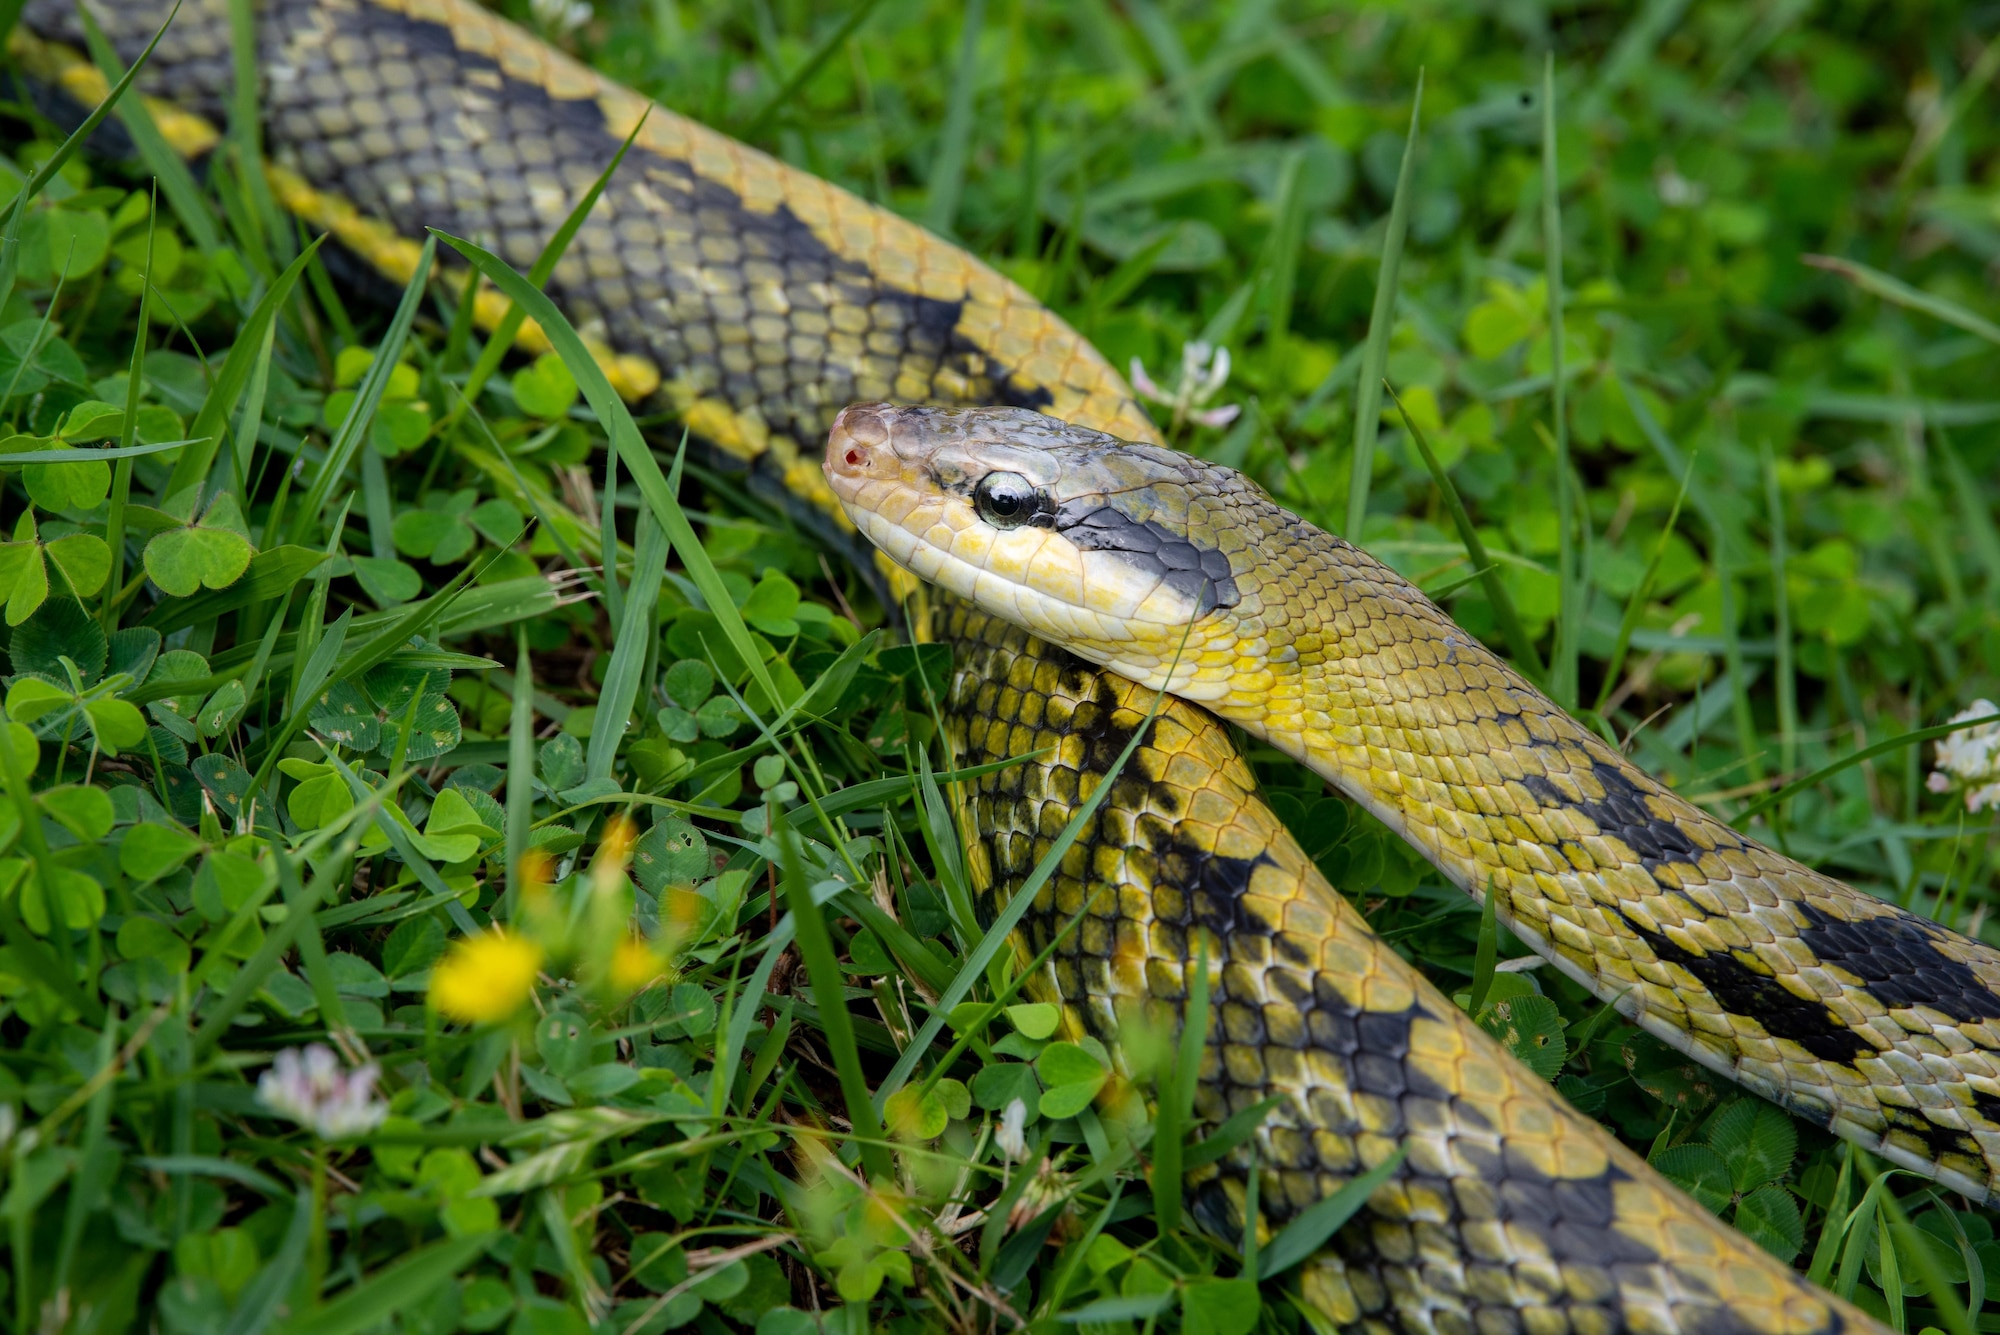 A Taiwanese Beauty Snake basks in the sun near the on-base Entomology Pest Management Section, June 5, 2019, at Kadena Air Base, Japan. Import, transport and keeping of Taiwanese Beauty Snakes is strictly prohibited by Japan's Invasive Alien Species Act due to its negative impacts on the island's natural ecosystem. (U.S. Air Force photo by Senior Airman Kristan Campbell)